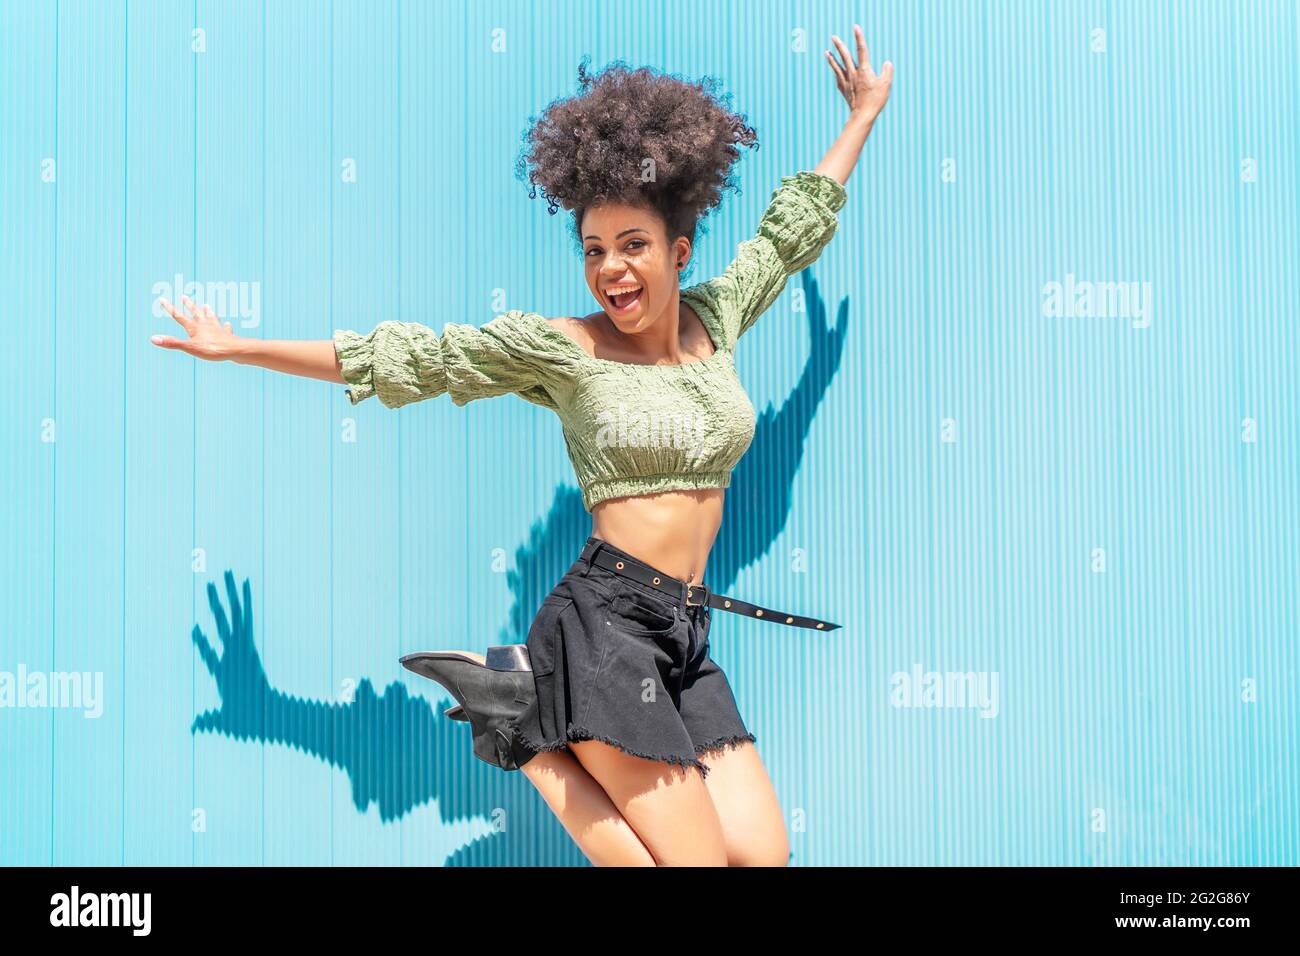 happy woman with afro hair jumping for joy Stock Photo